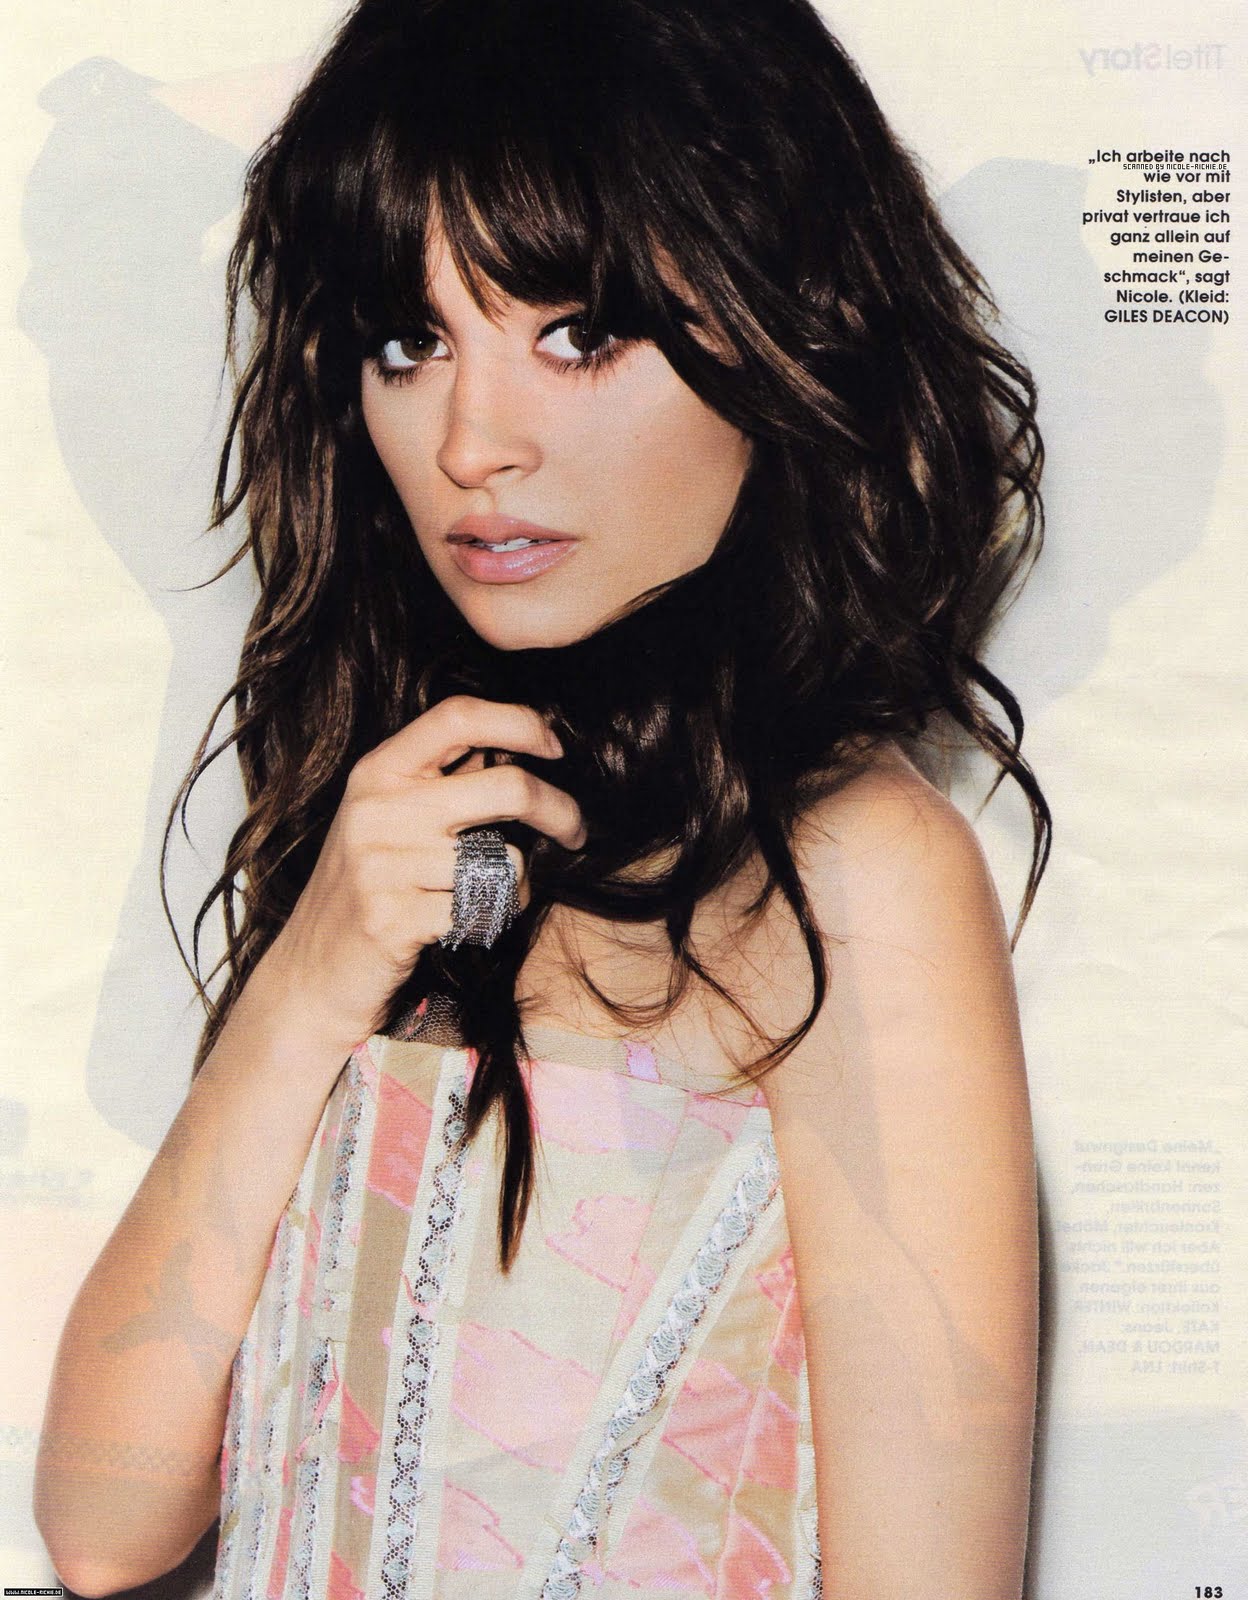 NICOLE RICHIE FASHION: Nicole Richie in InStyle Germany, May 2010